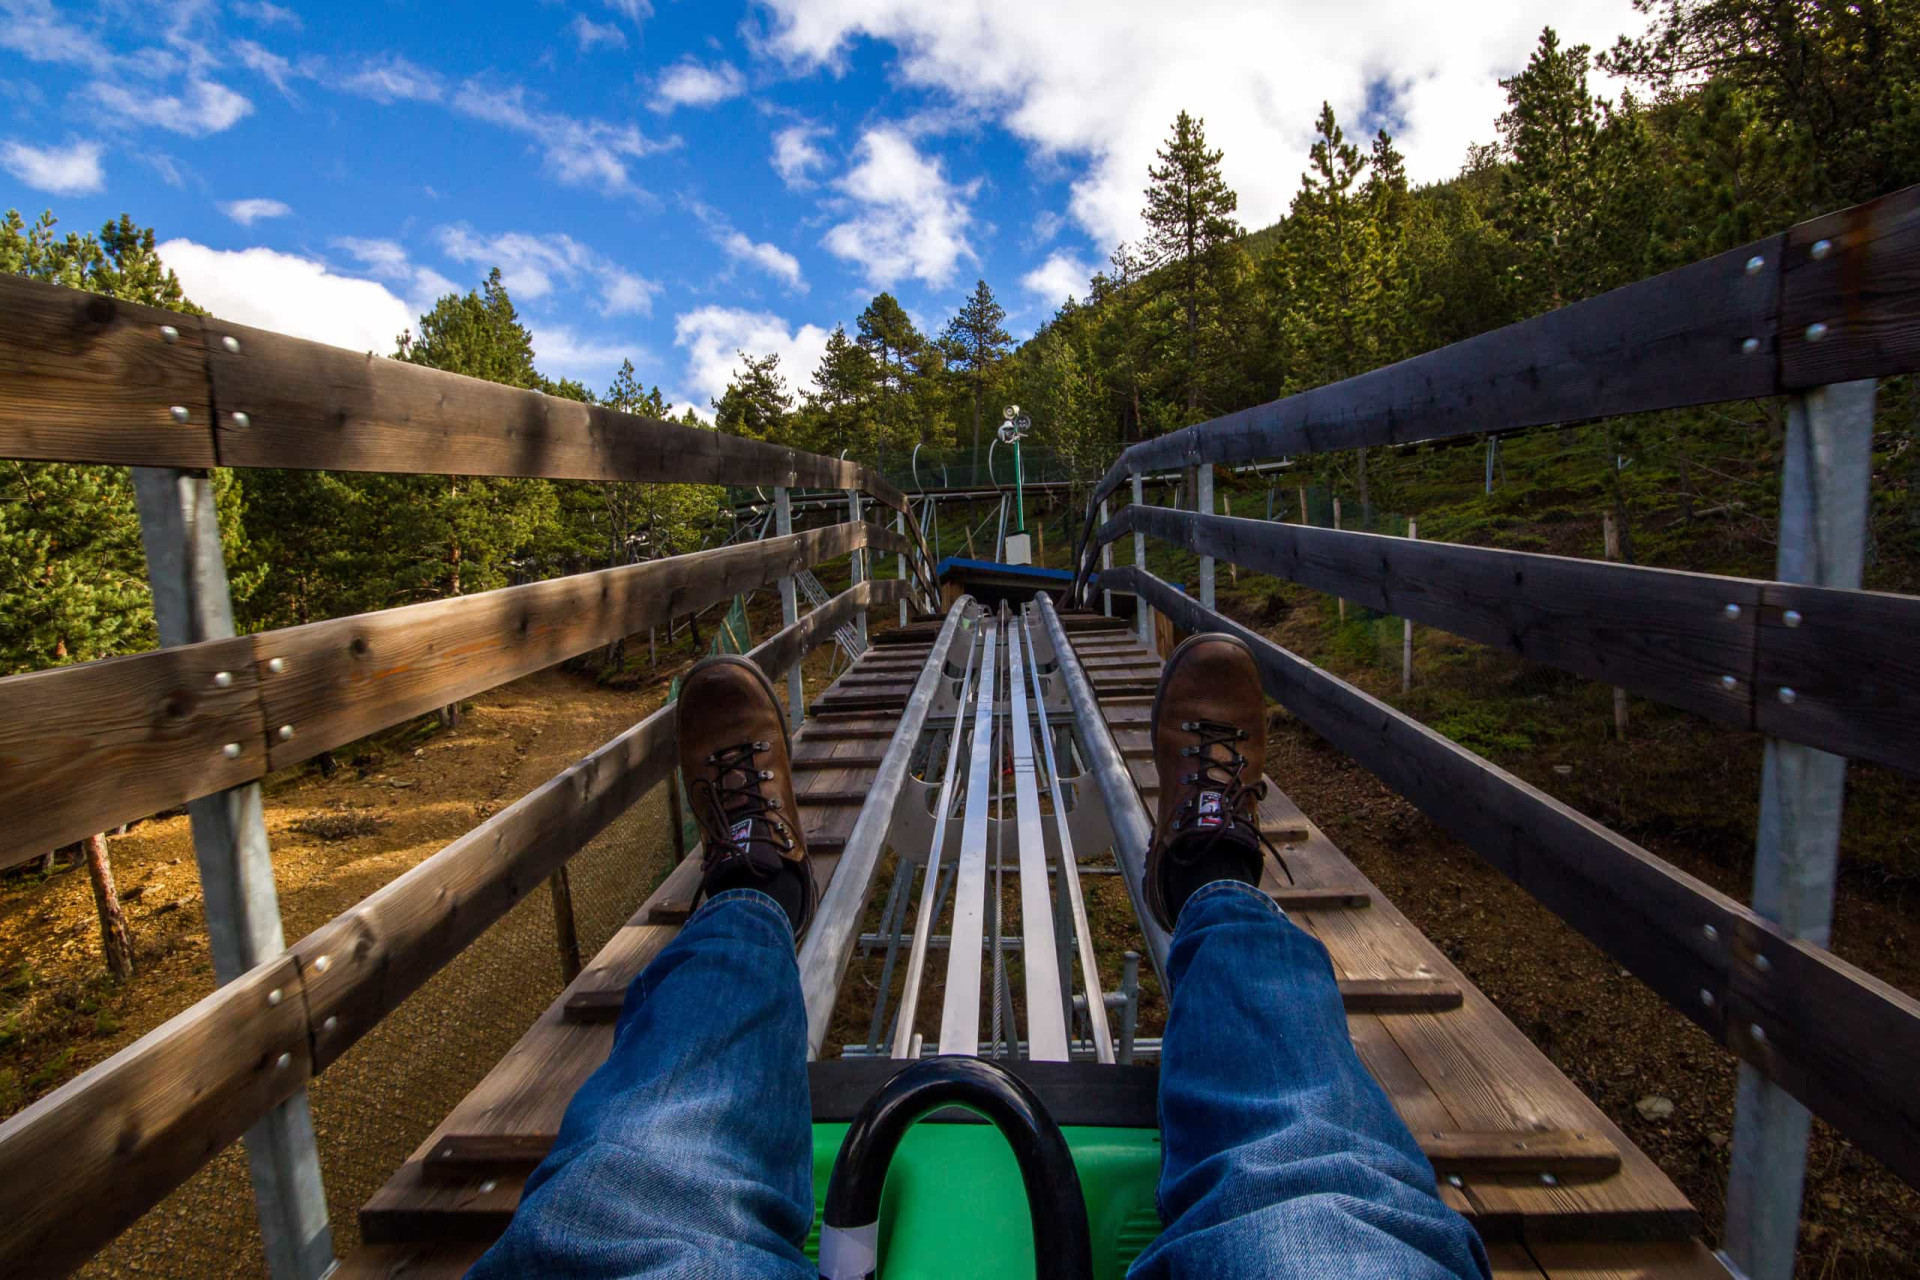 <p>Adrenaline junkies won't want to miss the Tobotronc, the longest alpine slide in the world. Located just outside of Sant Julià de Lòria, the Tobotronc winds 3.3 miles (5.3 km) through the Pyrenean alpine forests.</p><p><a href="https://www.msn.com/en-za/community/channel/vid-7xx8mnucu55yw63we9va2gwr7uihbxwc68fxqp25x6tg4ftibpra?cvid=94631541bc0f4f89bfd59158d696ad7e">Follow us and access great exclusive content every day</a></p>